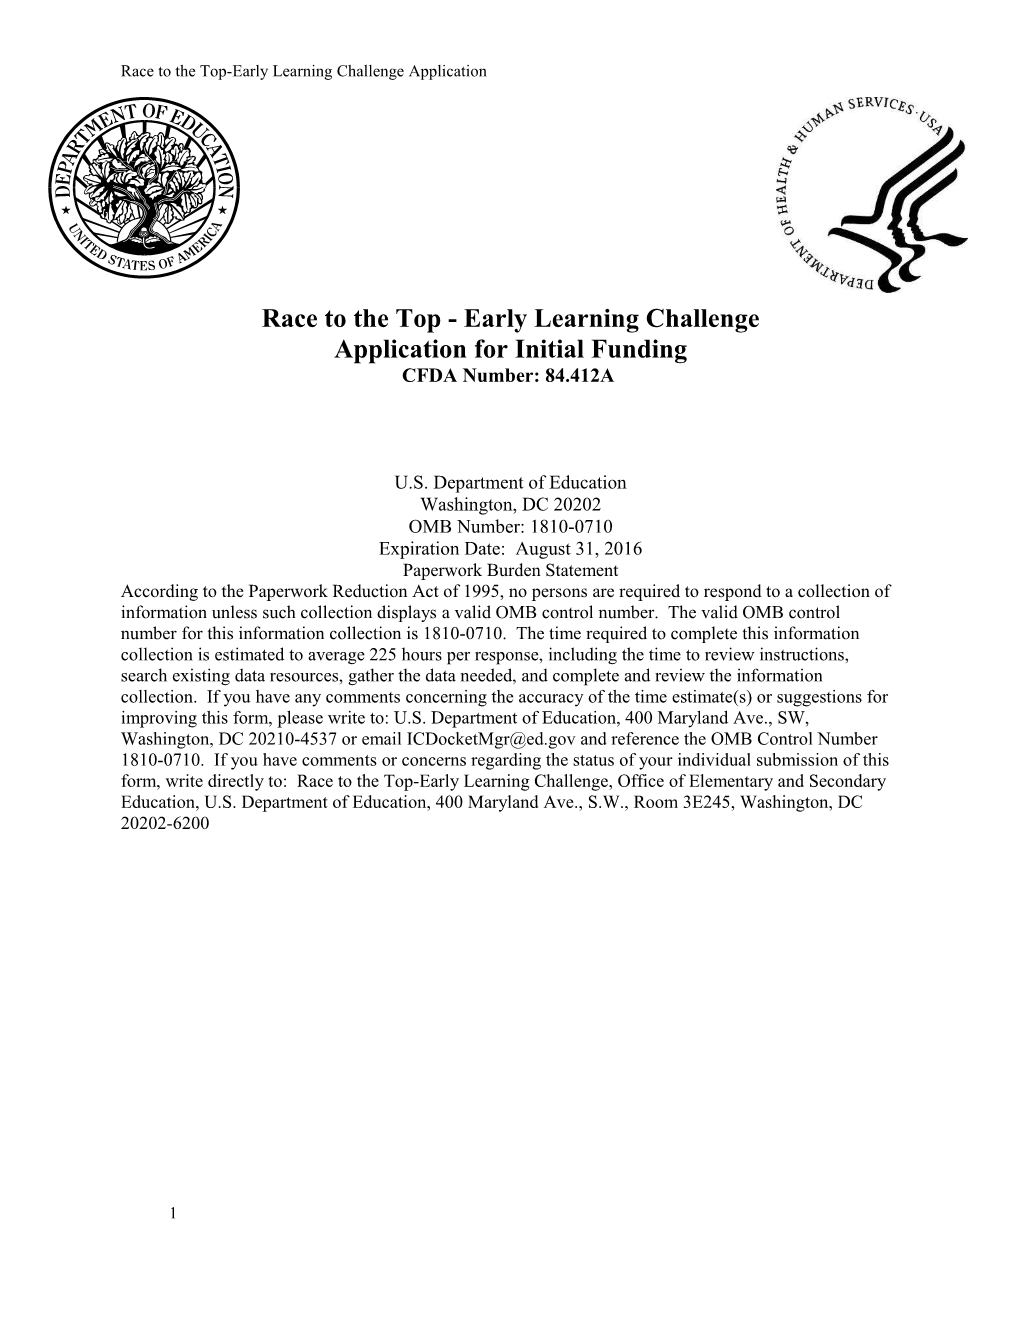 FY 2013 Application for Race to the Top Early Learning Challenge Program (MS Word)